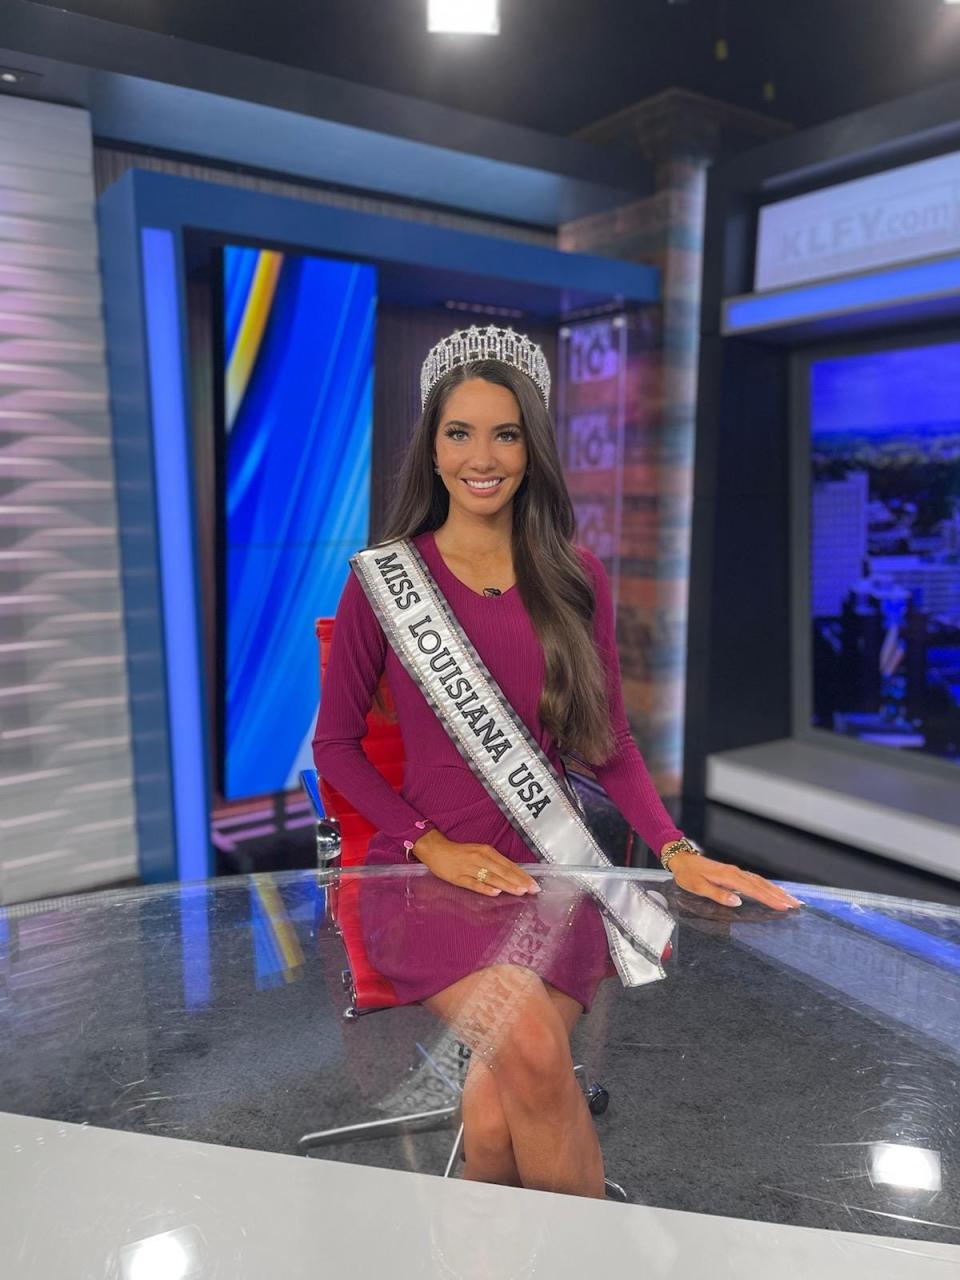 Sylvia Masters poses in the KLFY-TV newsroom in Lafayette, where she works as a morning anchor. She was crowned Miss Louisiana USA on Saturday.